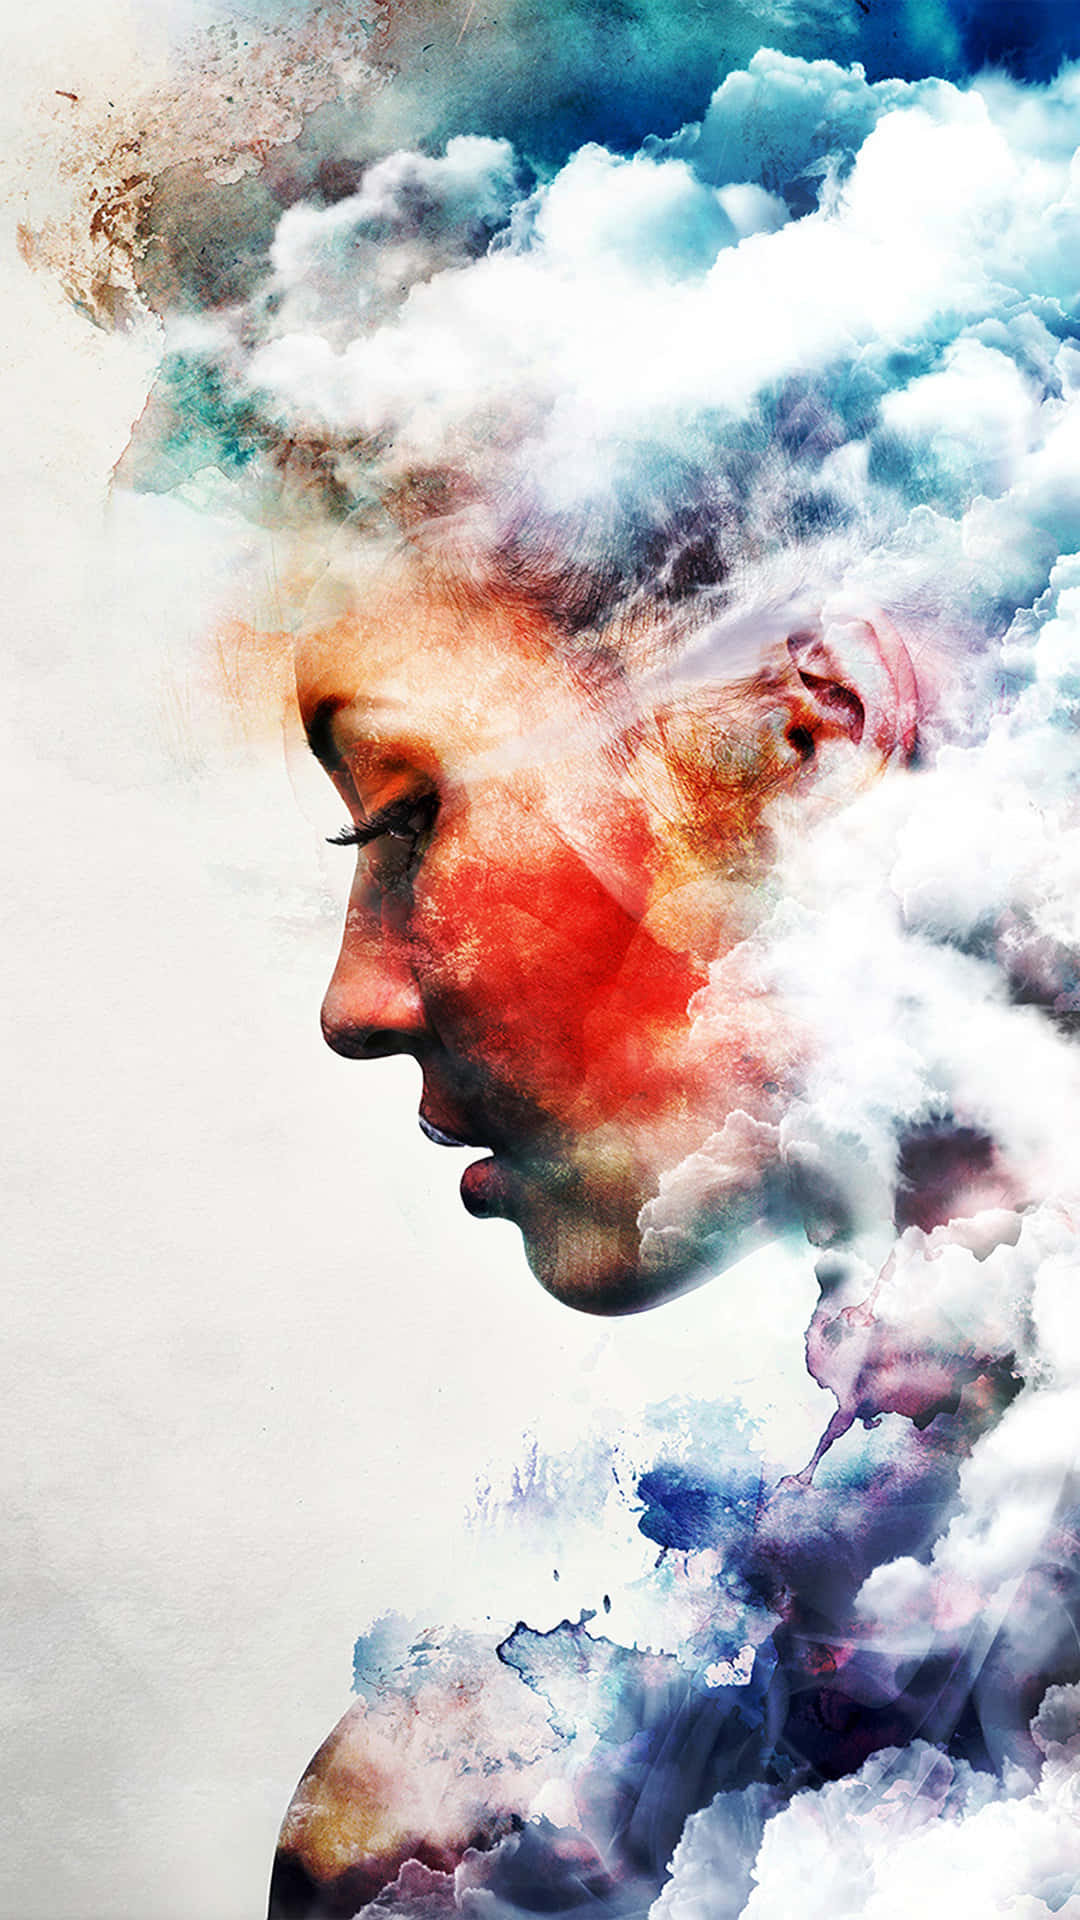 Abstract Mind Clouds.jpg Wallpaper